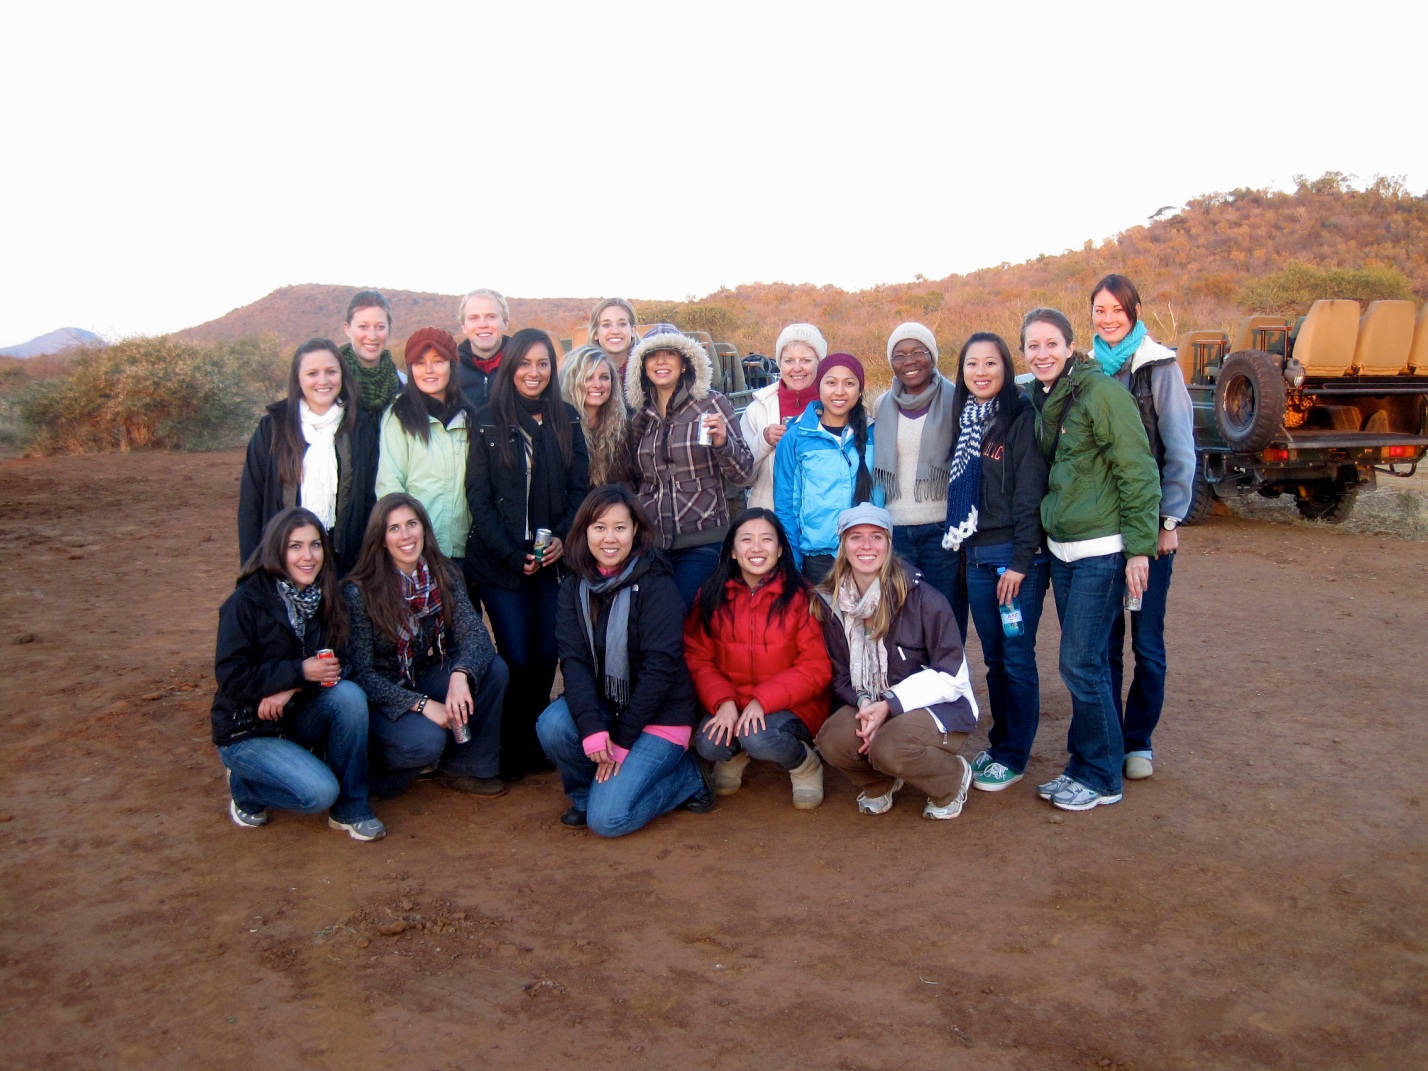 A Group of undergrad and NP students with two faculty during a safari game ride in South Africa.